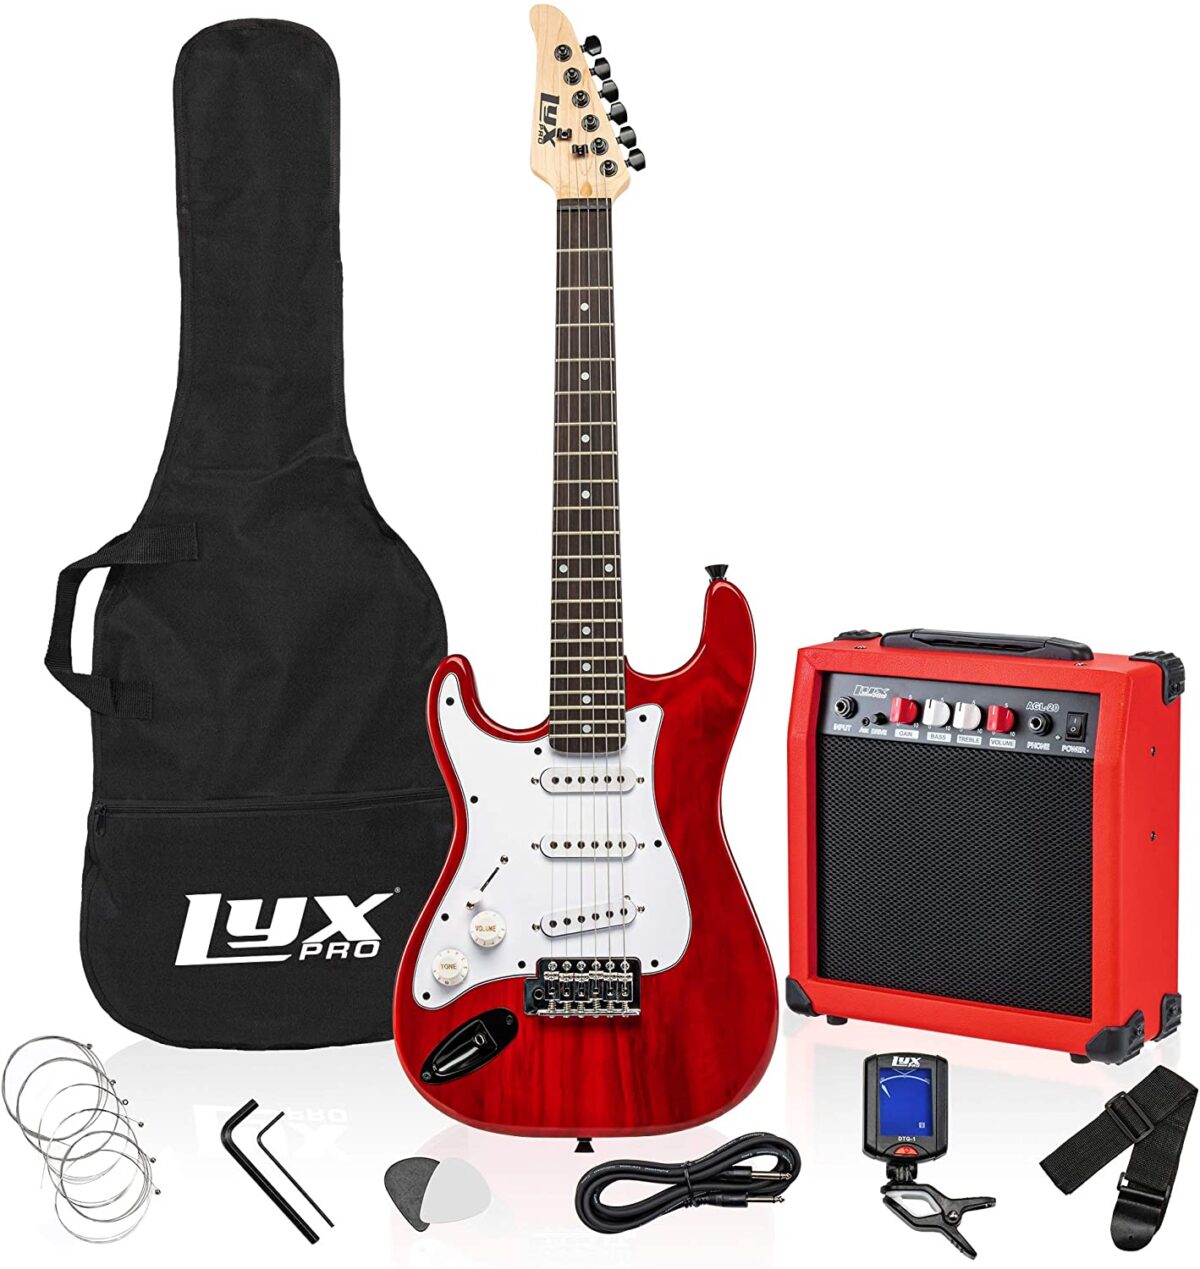 LyxPro Left Hand 36 Inch Electric Guitar and Kit for Lefty Kids